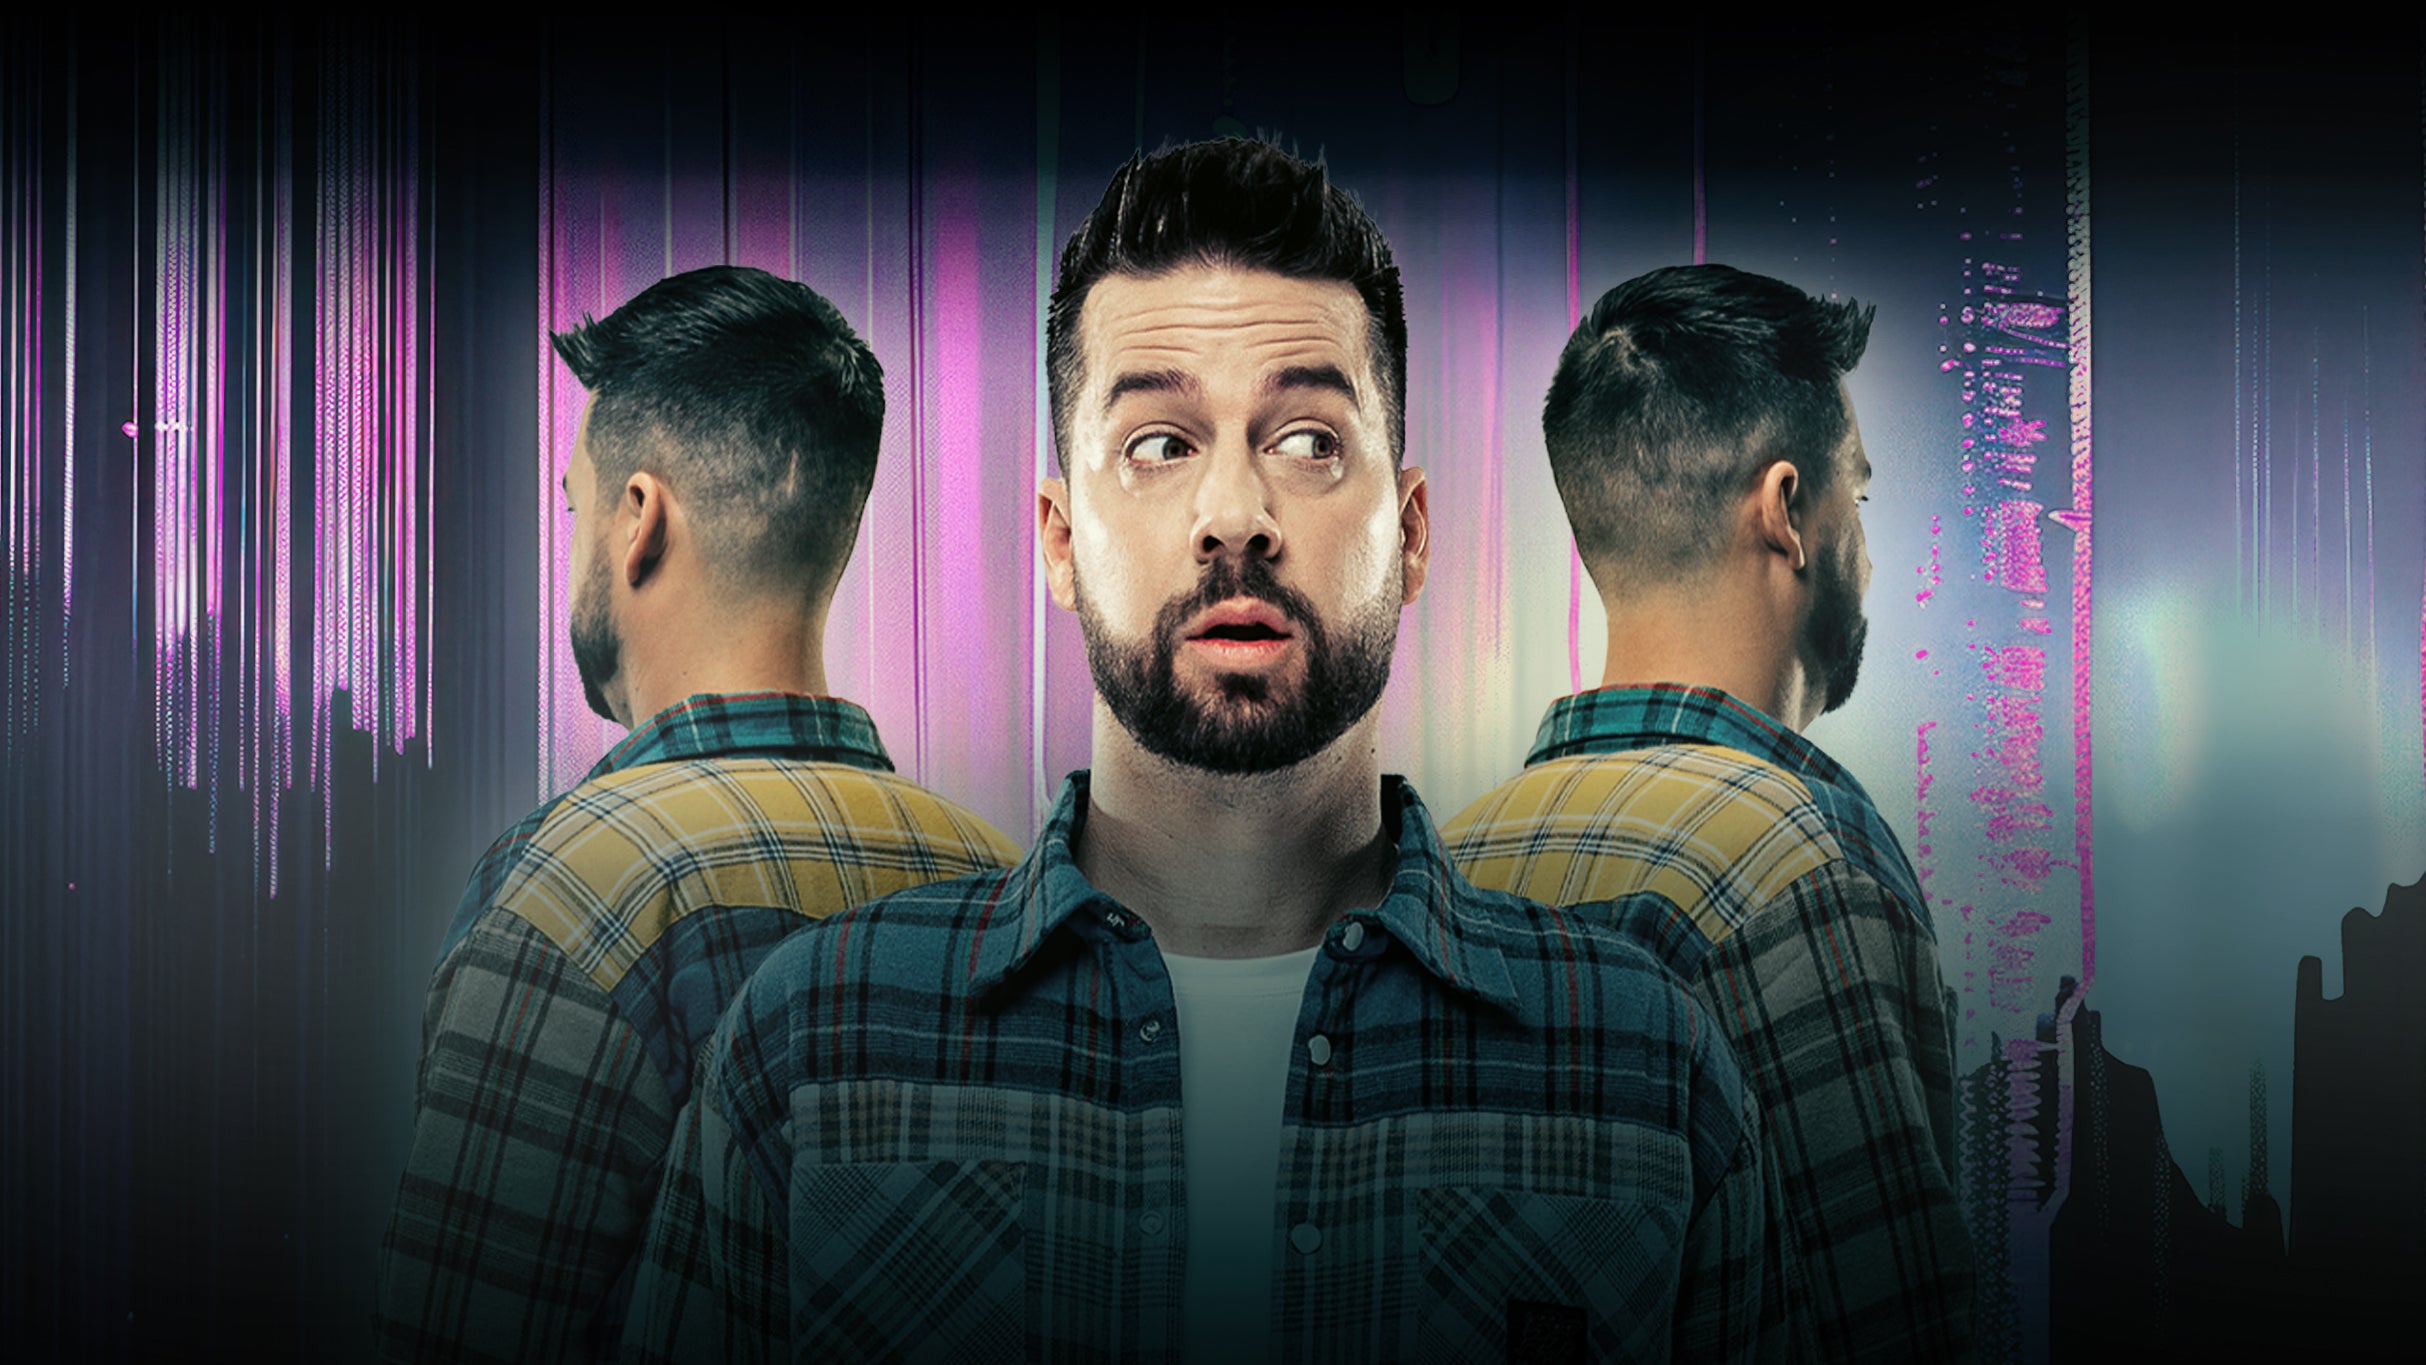 John Crist: Special Taping in Duluth promo photo for Exclusive presale offer code